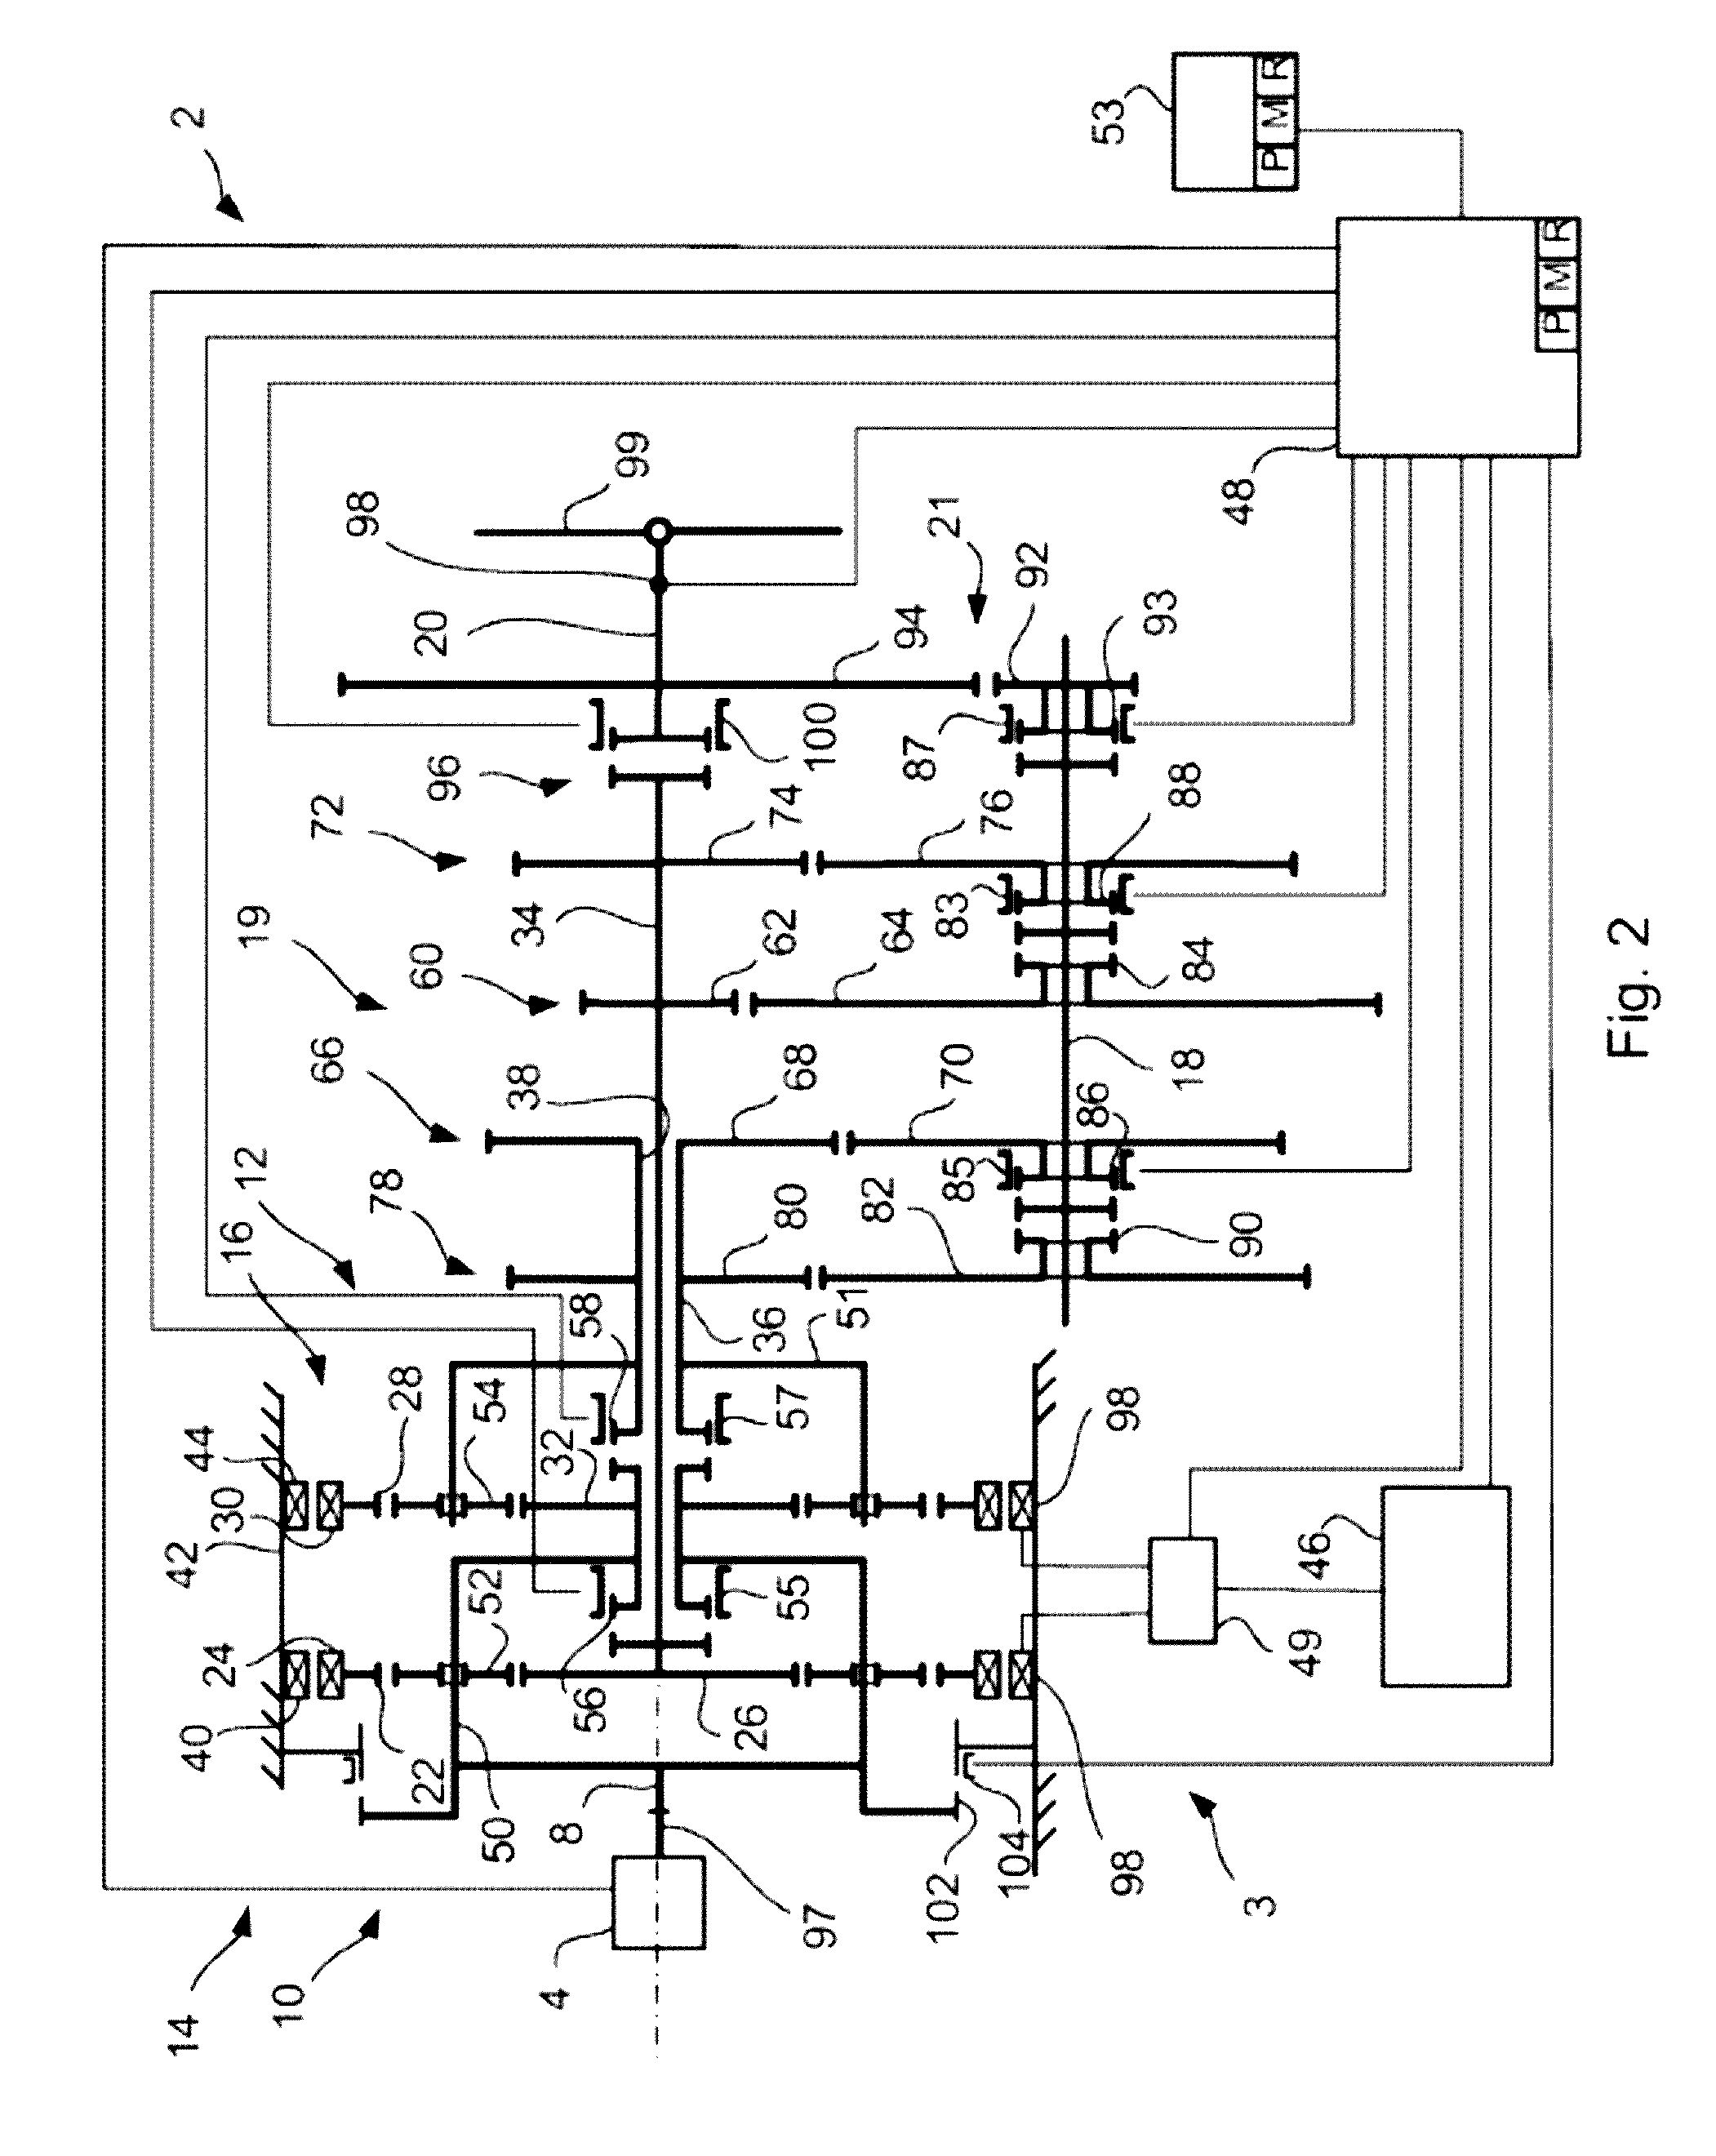 Method for controlling a hybrid driveline